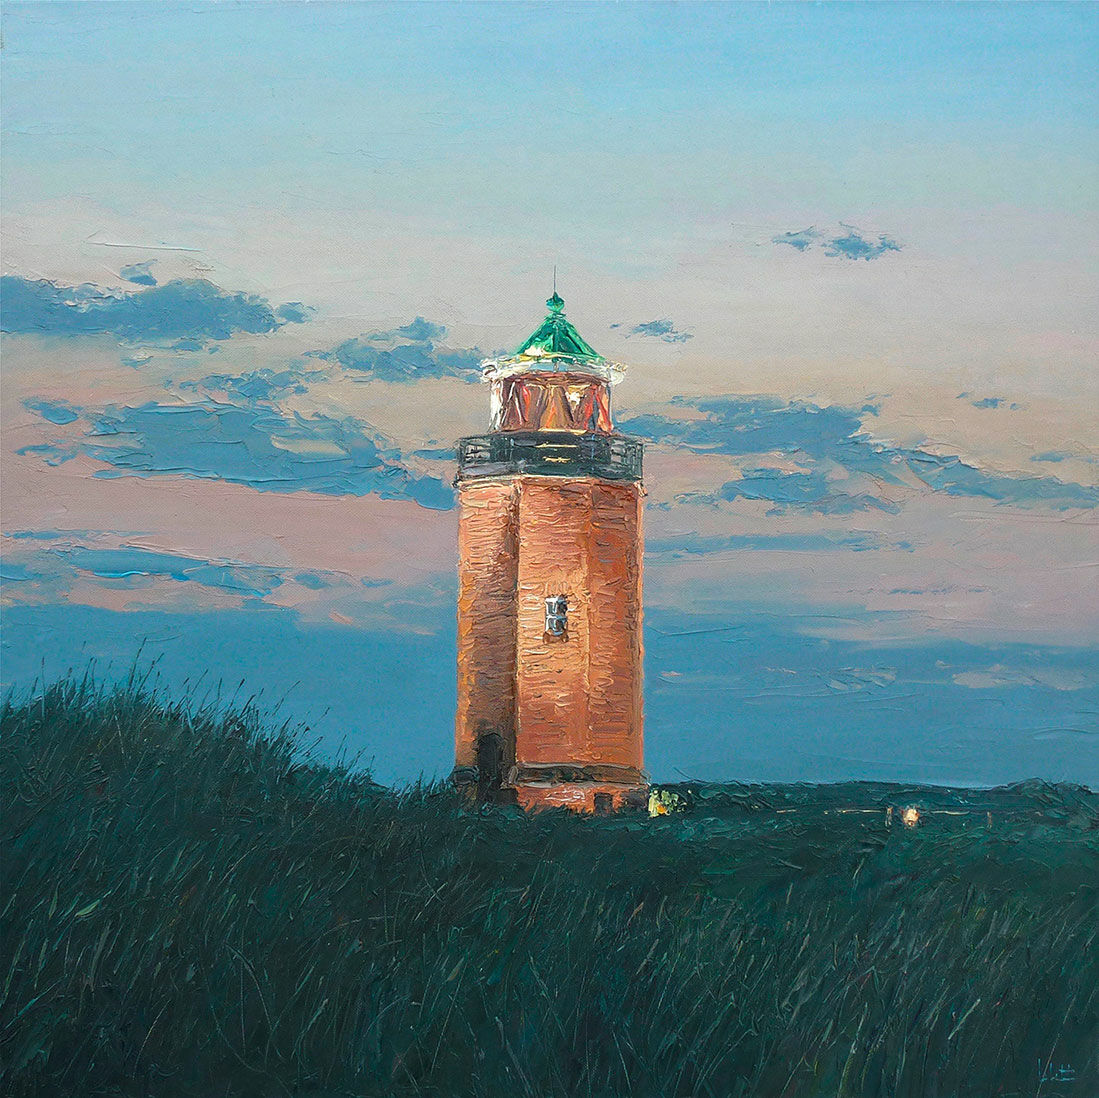 Picture "Lighthouse in Kampen" (2021) (Original / Unique piece), on stretcher frame by Peter Witt